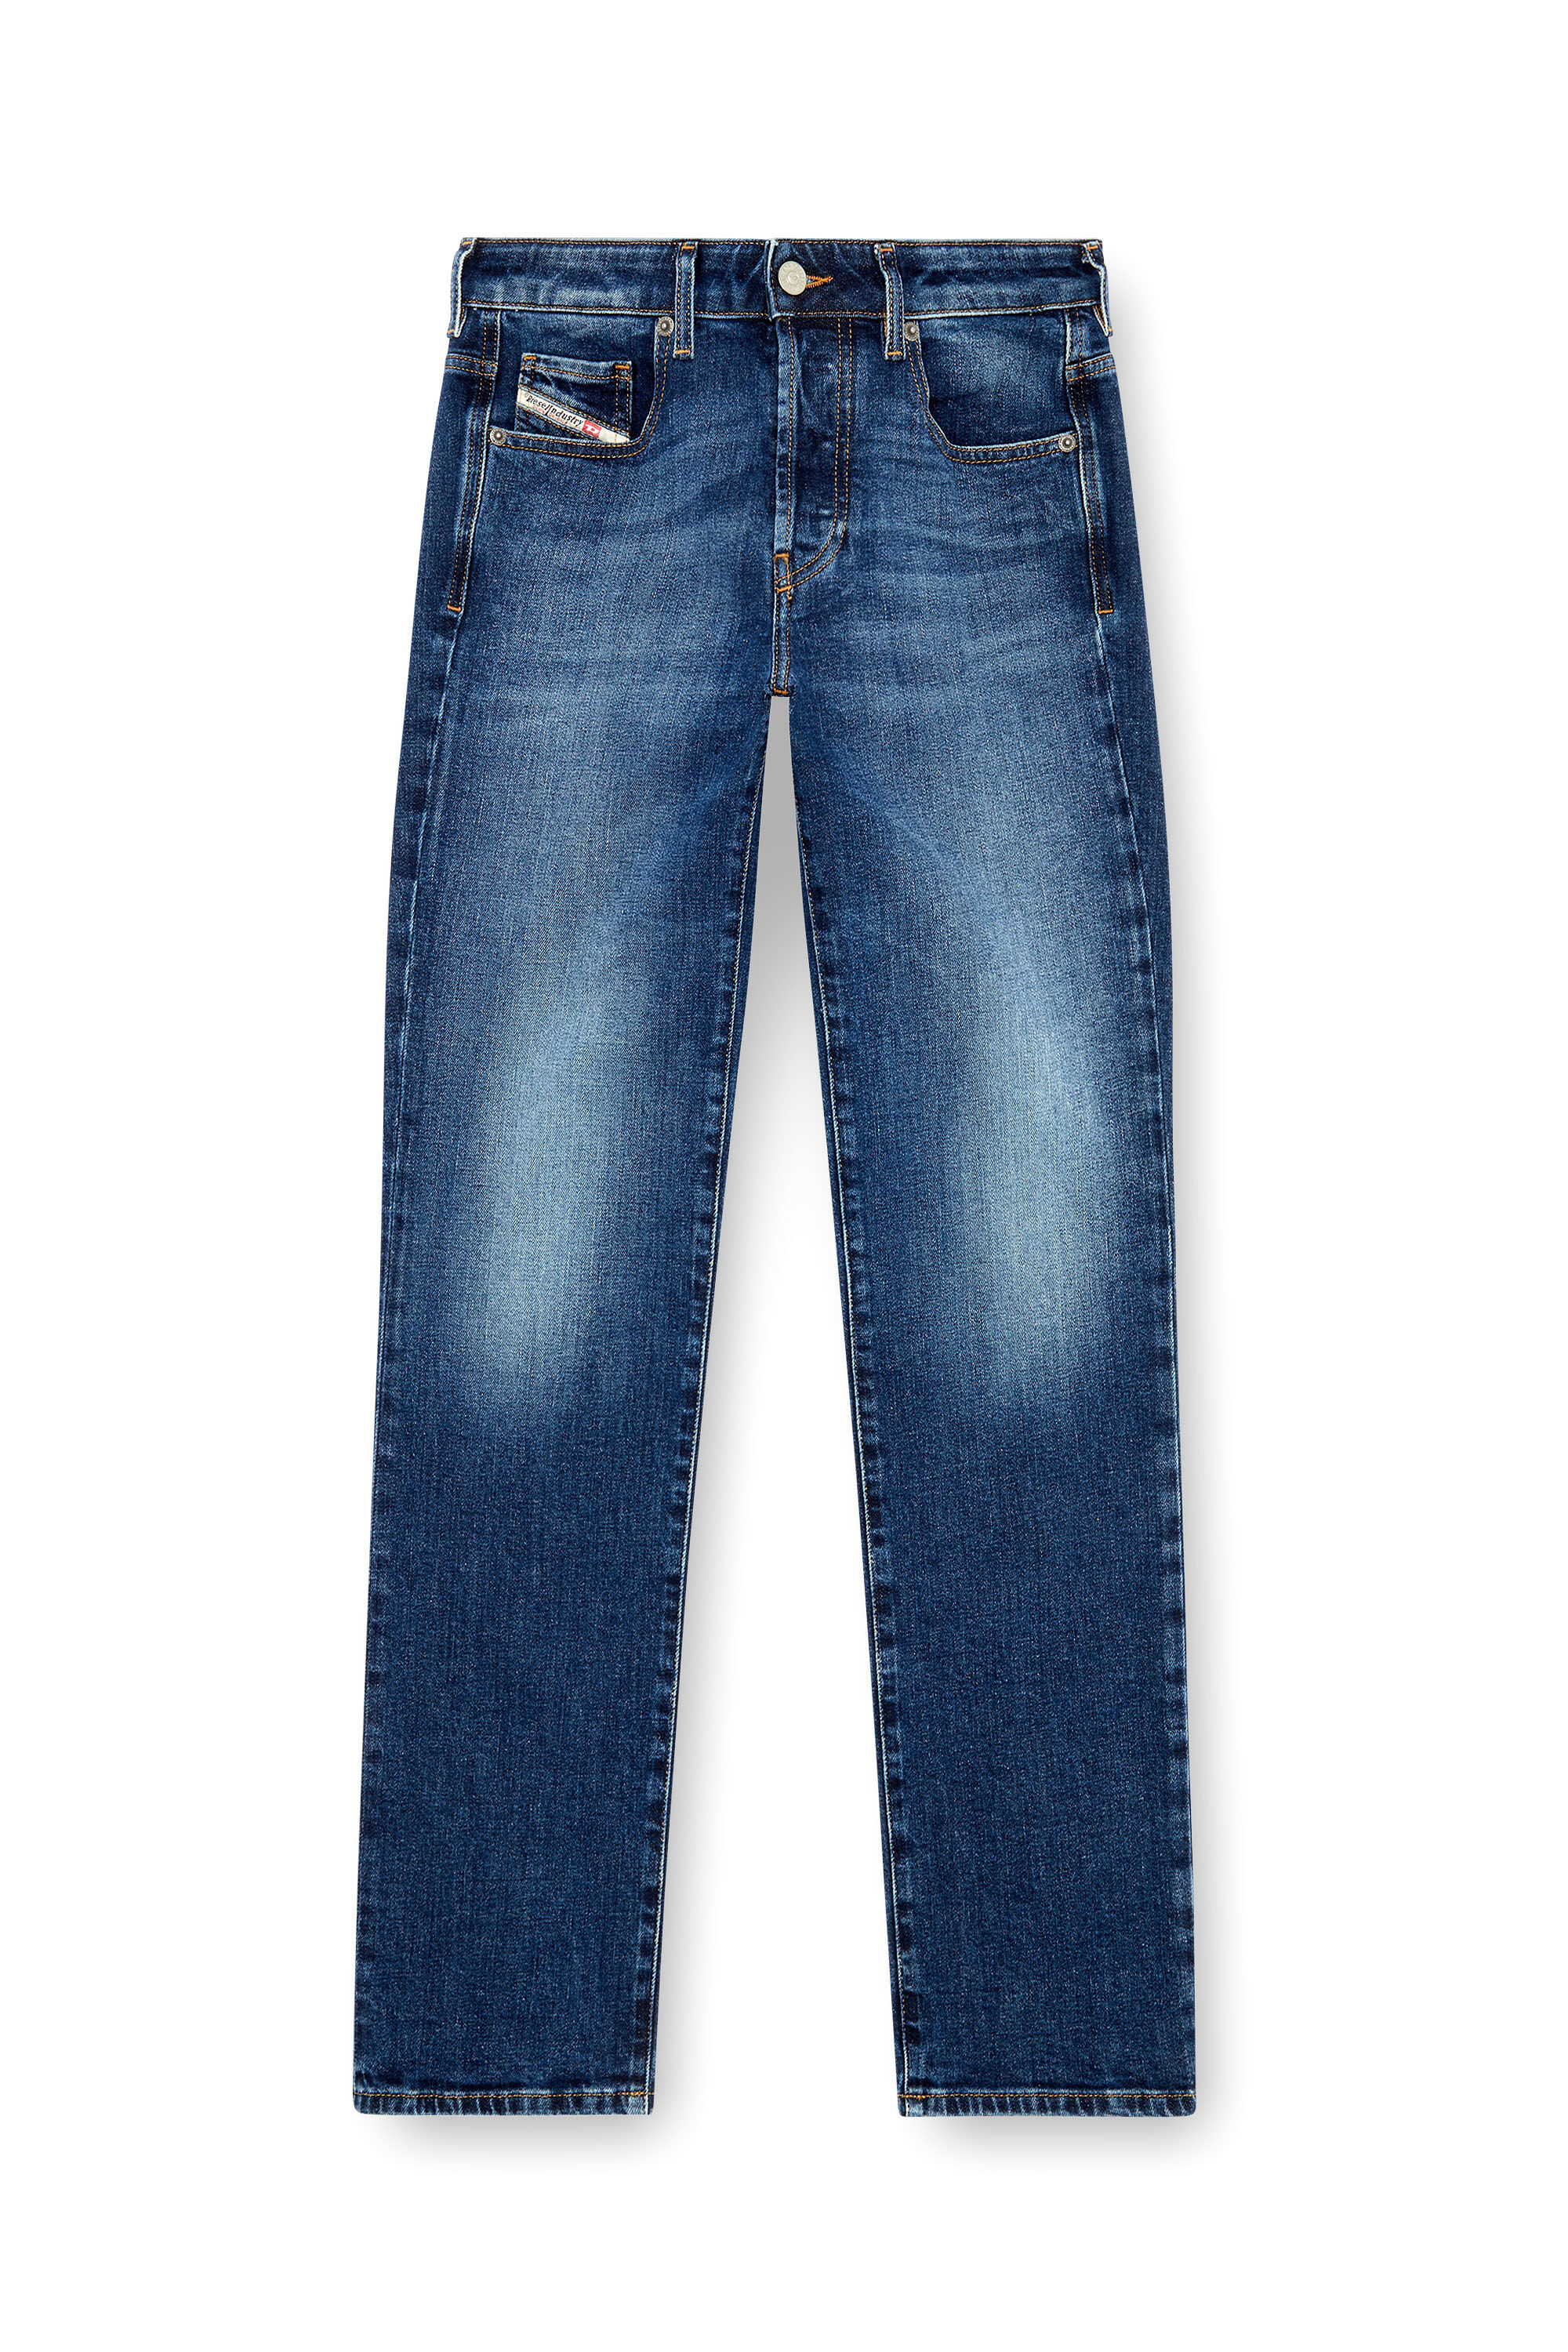 Diesel - Straight Jeans 1989 D-Mine 09I28, Mujer Straight Jeans - 1989 D-Mine in Azul marino - Image 2